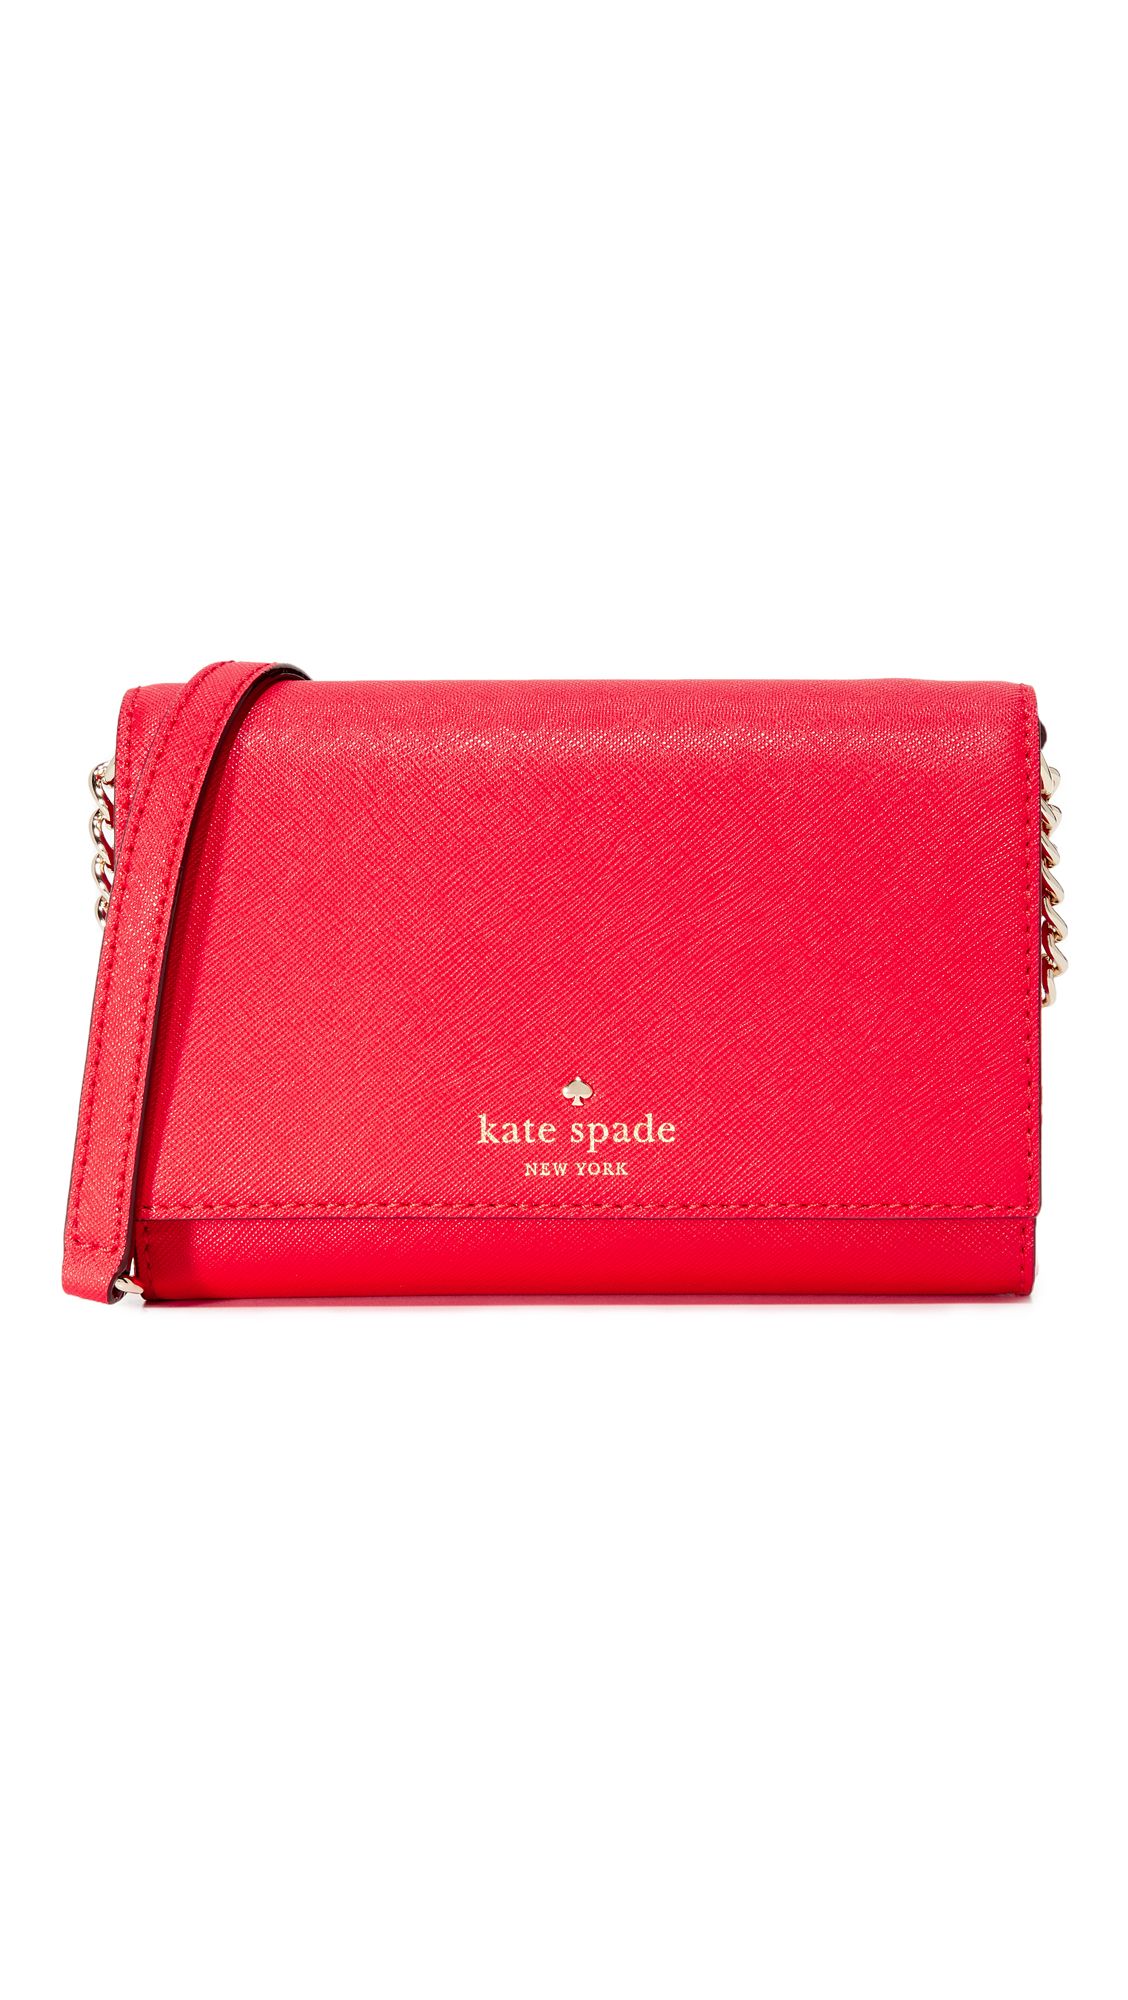 Kate Spade New York Cami Cross Body Bag - Rooster Red | Shopbop